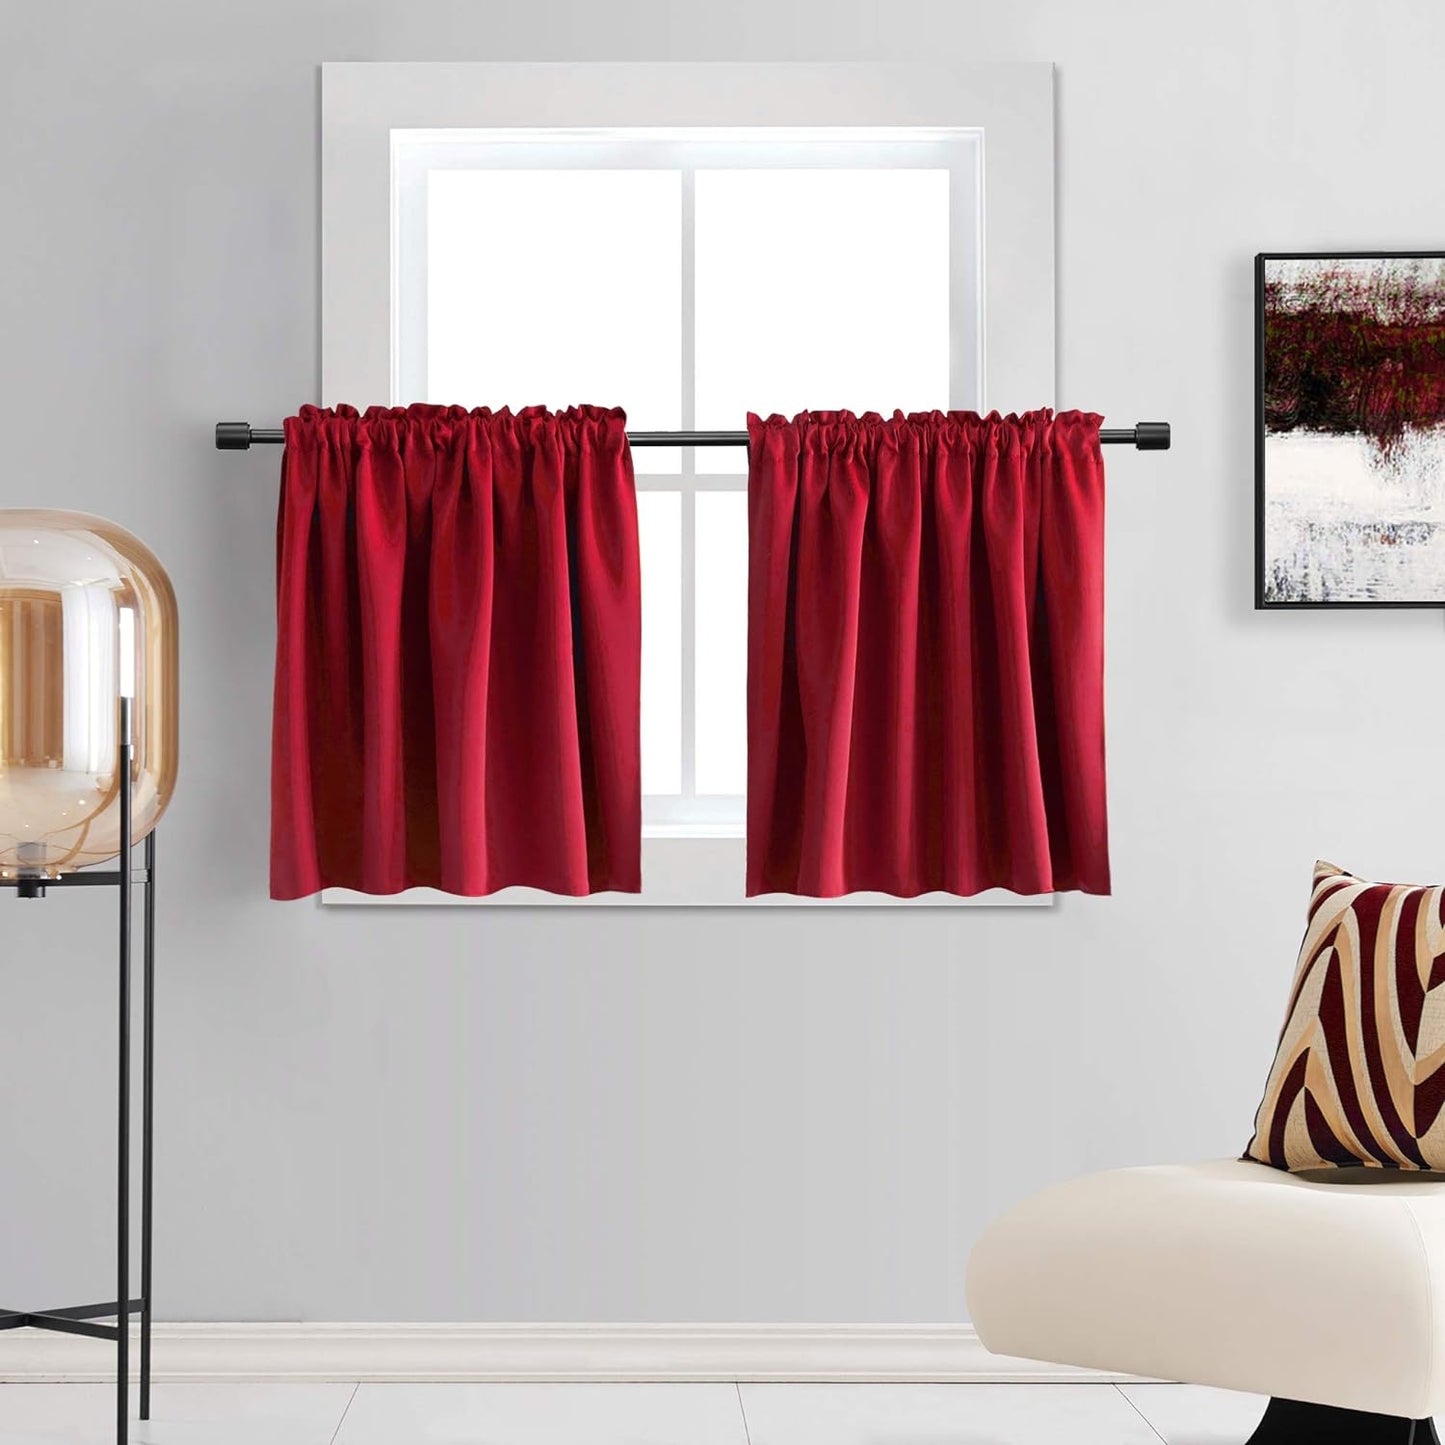 DONREN 24 Inch Length Curtains- 2 Panels Blackout Thermal Insulating Small Curtain Tiers for Bathroom with Rod Pocket (Black,42 Inch Width)  DONREN Red 42" X 30" 